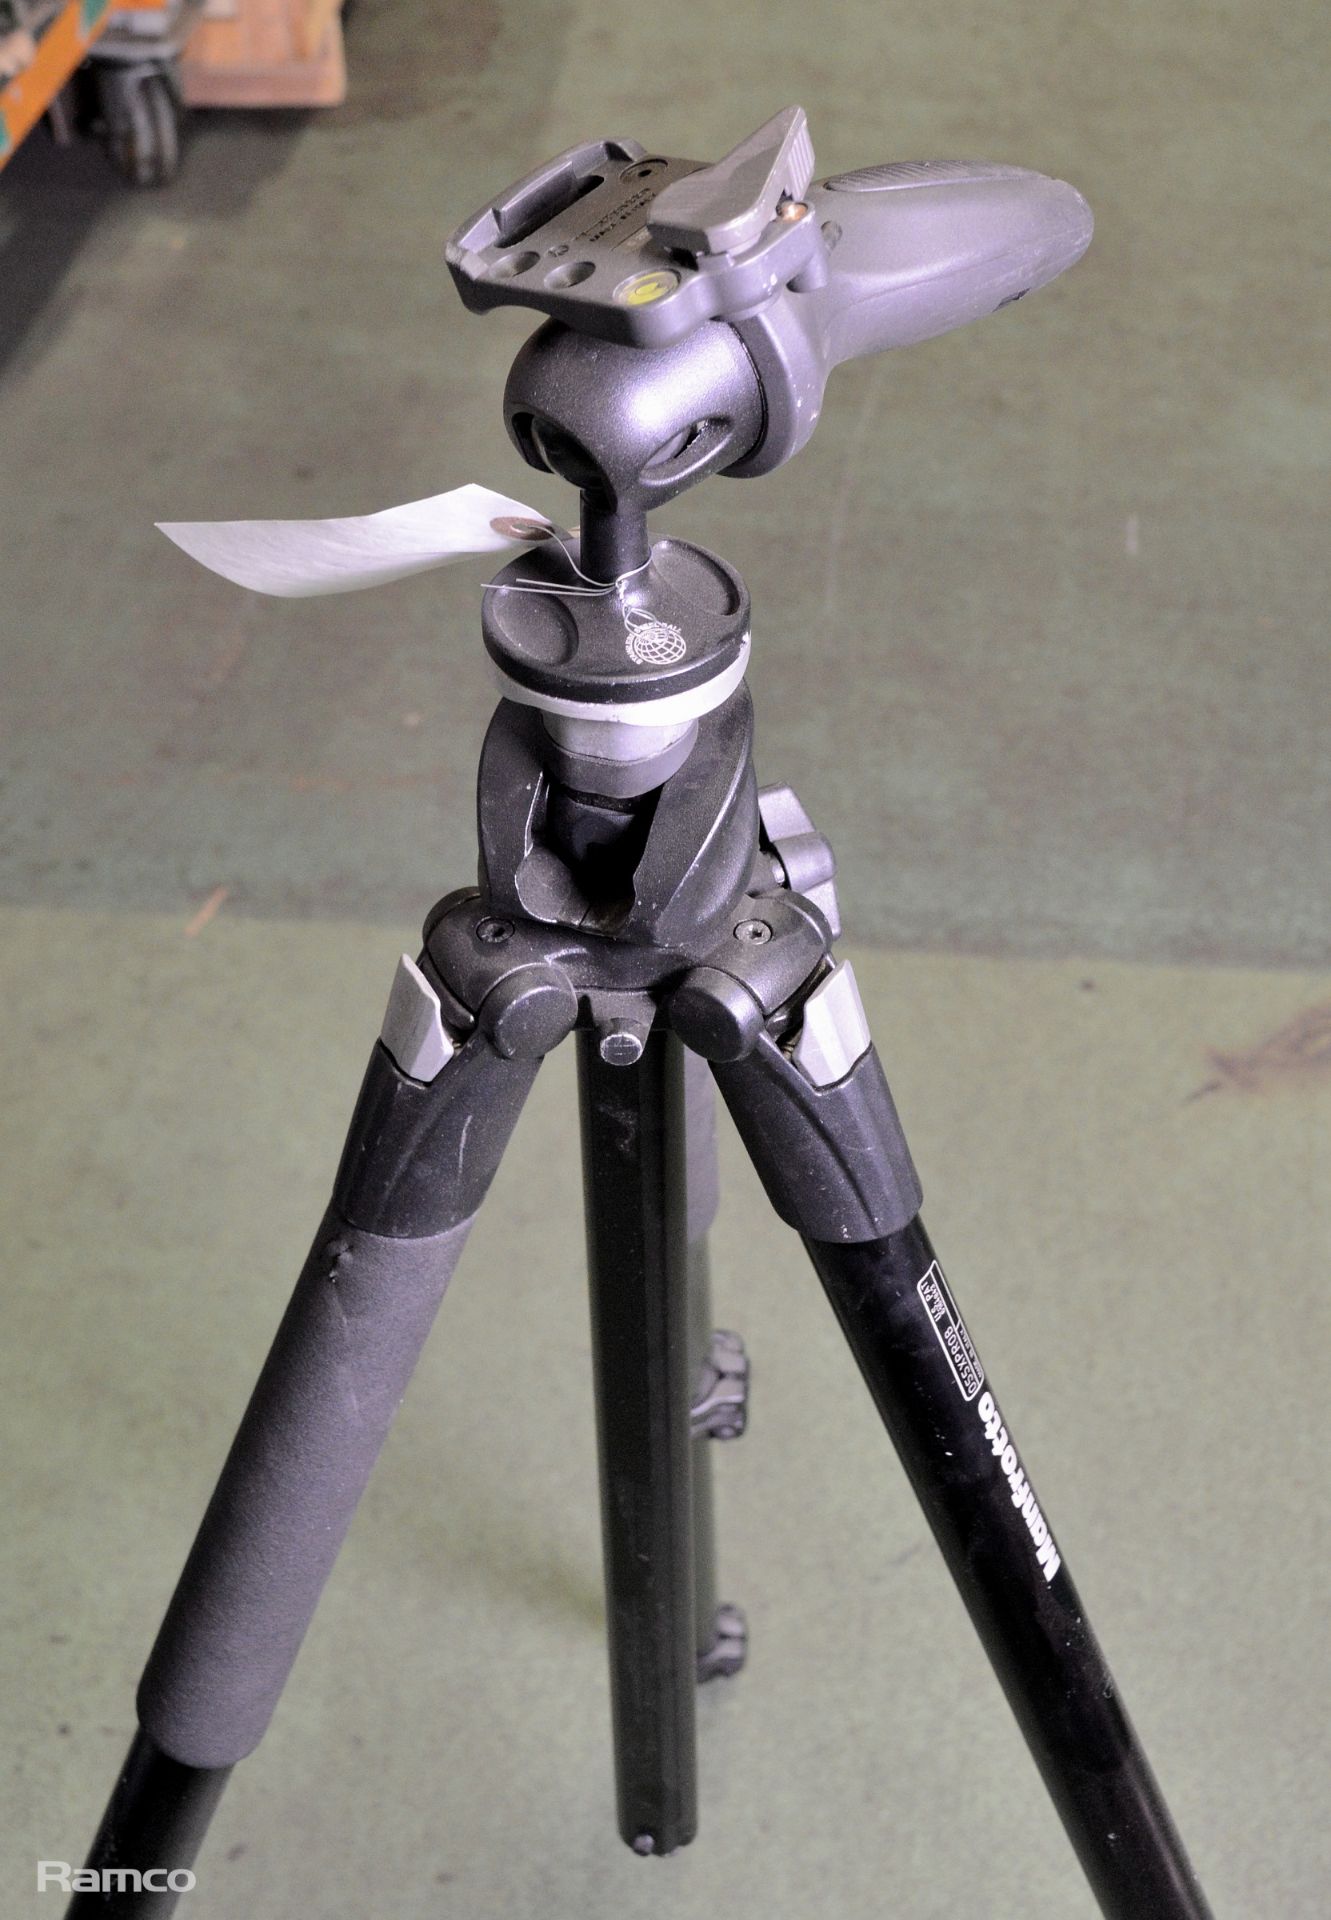 Manfrotto 055XPROB Tripod - Image 2 of 5